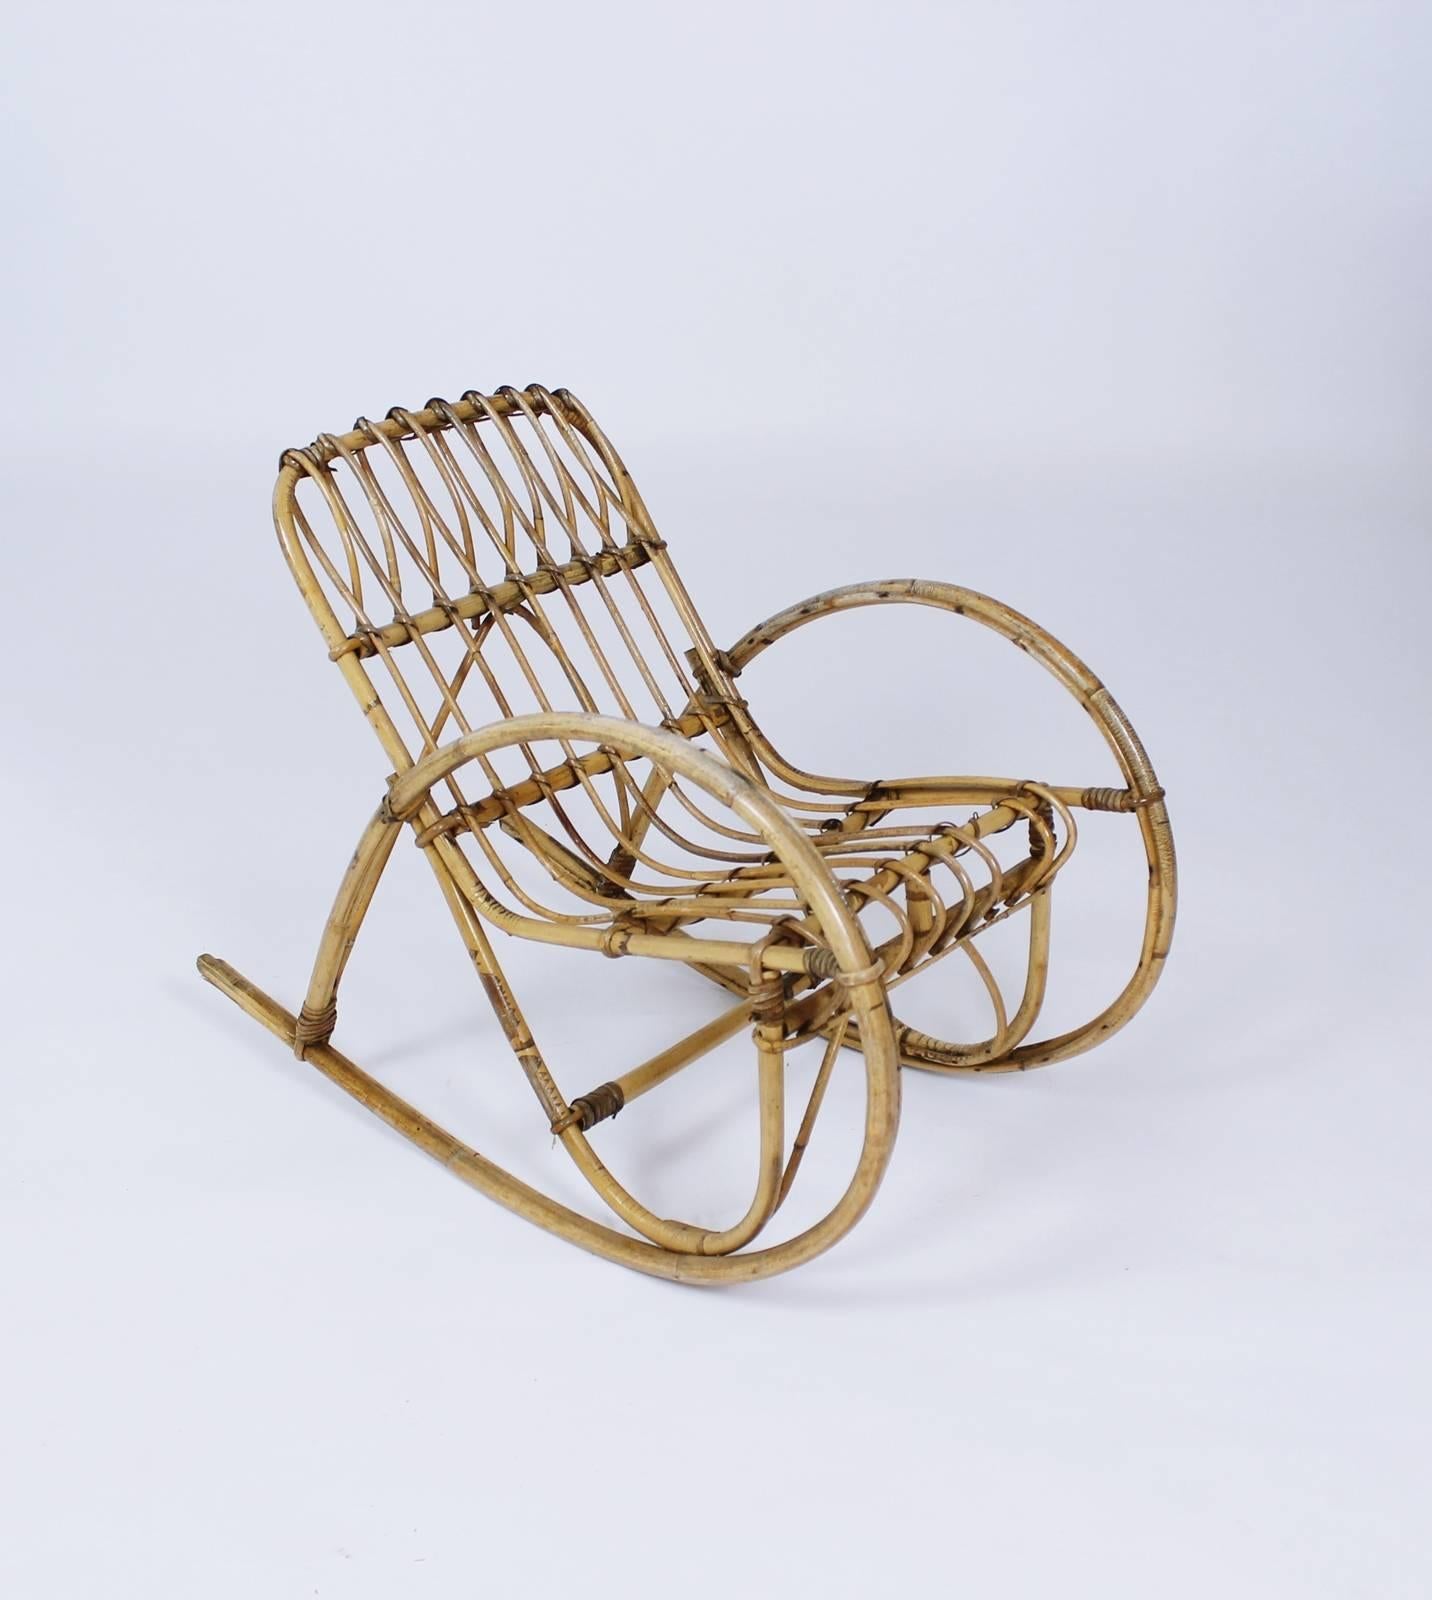 A vintage, circa 1950s, children's rocking chair in the bent rattan, graceful style of Franco Albini. Perfect for the little toddler or young child in your life. This chair is quite special in that its proportions are perfect and it is very